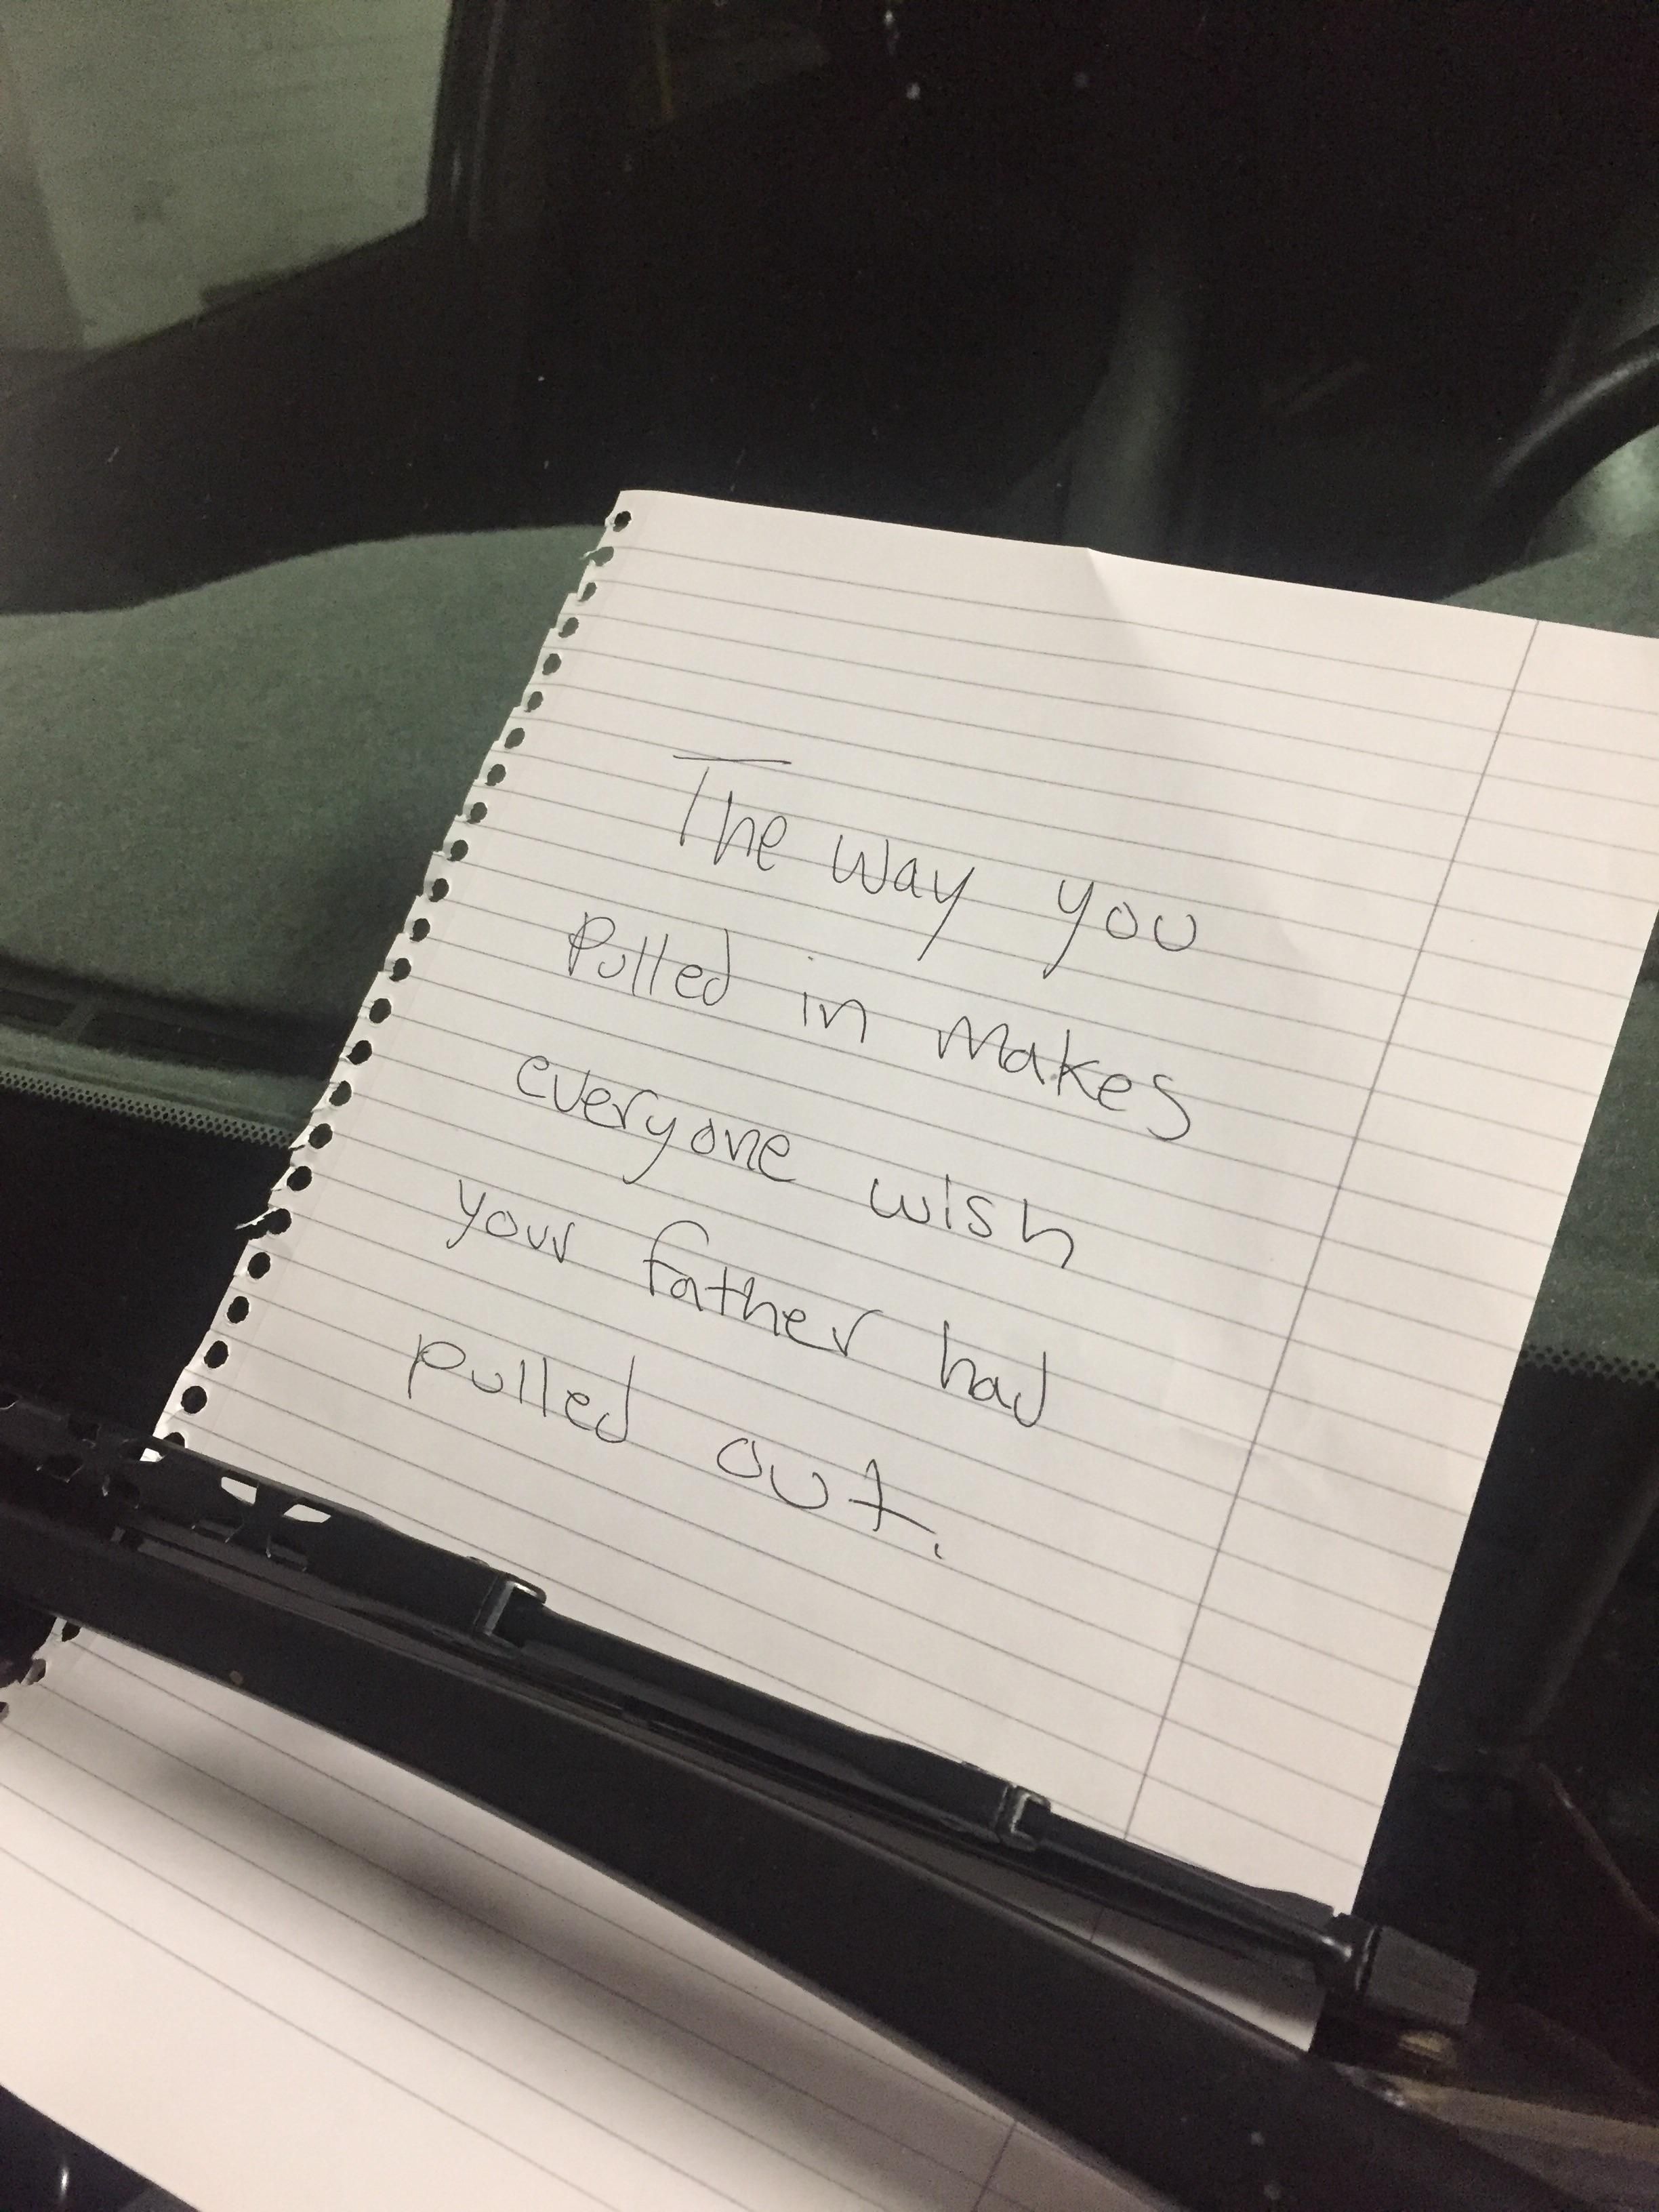 Guy blocked the driveway in the parking garage I'm in. This note was on his car.